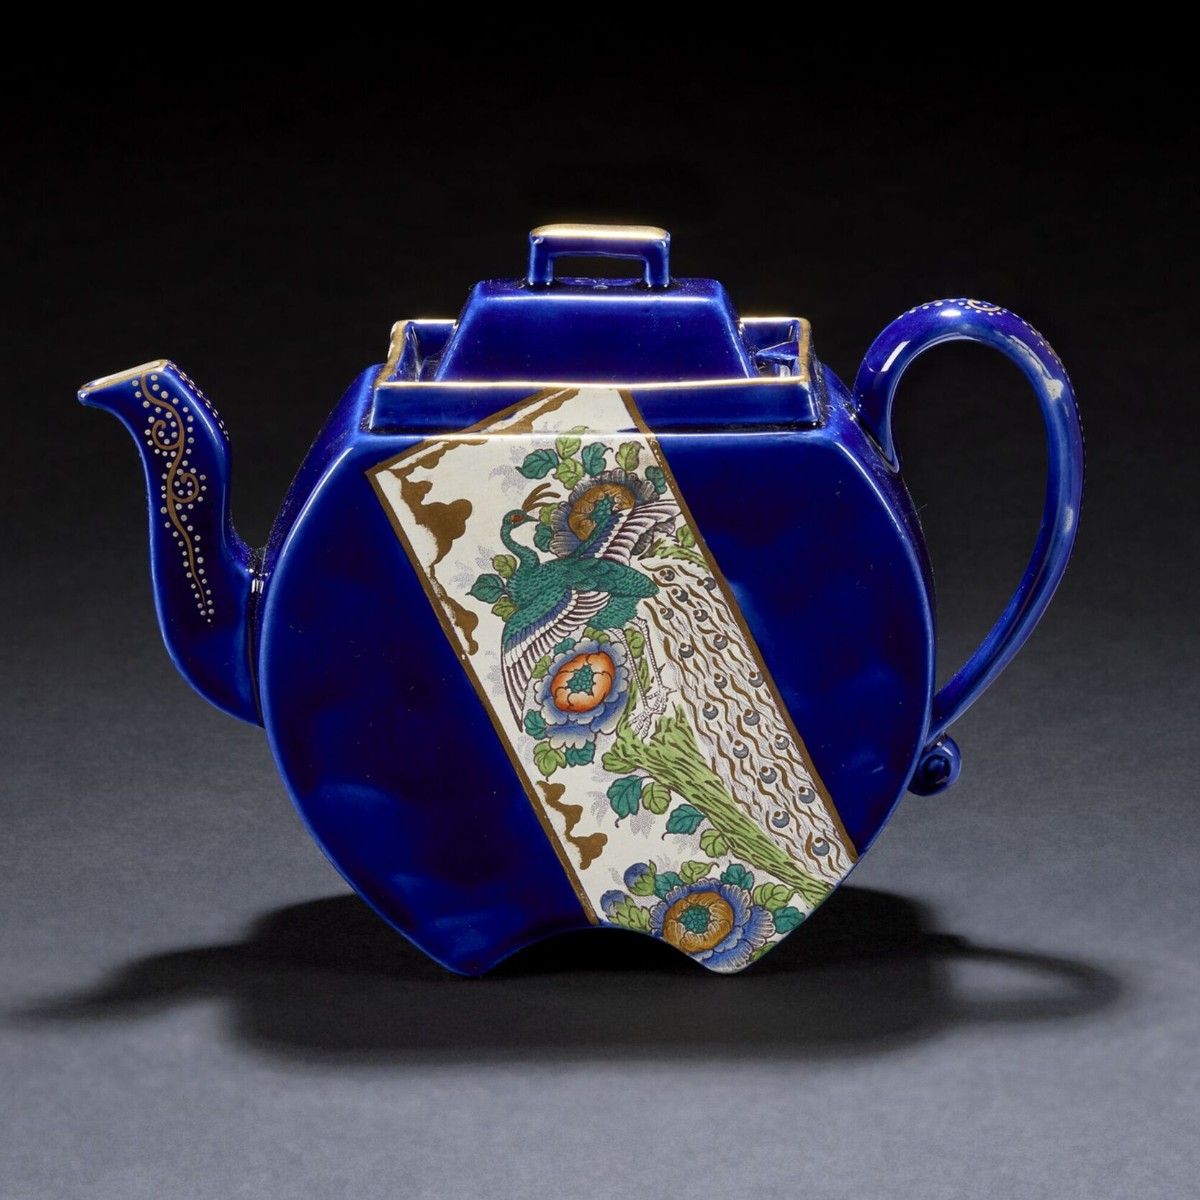 For #TeapotTuesday, we’d like to spotlight this 19th century teapot in 'satsuma' shape. The ‘flat’ sides made the shape perfect for all types of decoration. This particular example from 1873 depicts a mazarine blue and gold design called 'Mikado and Landscape'.